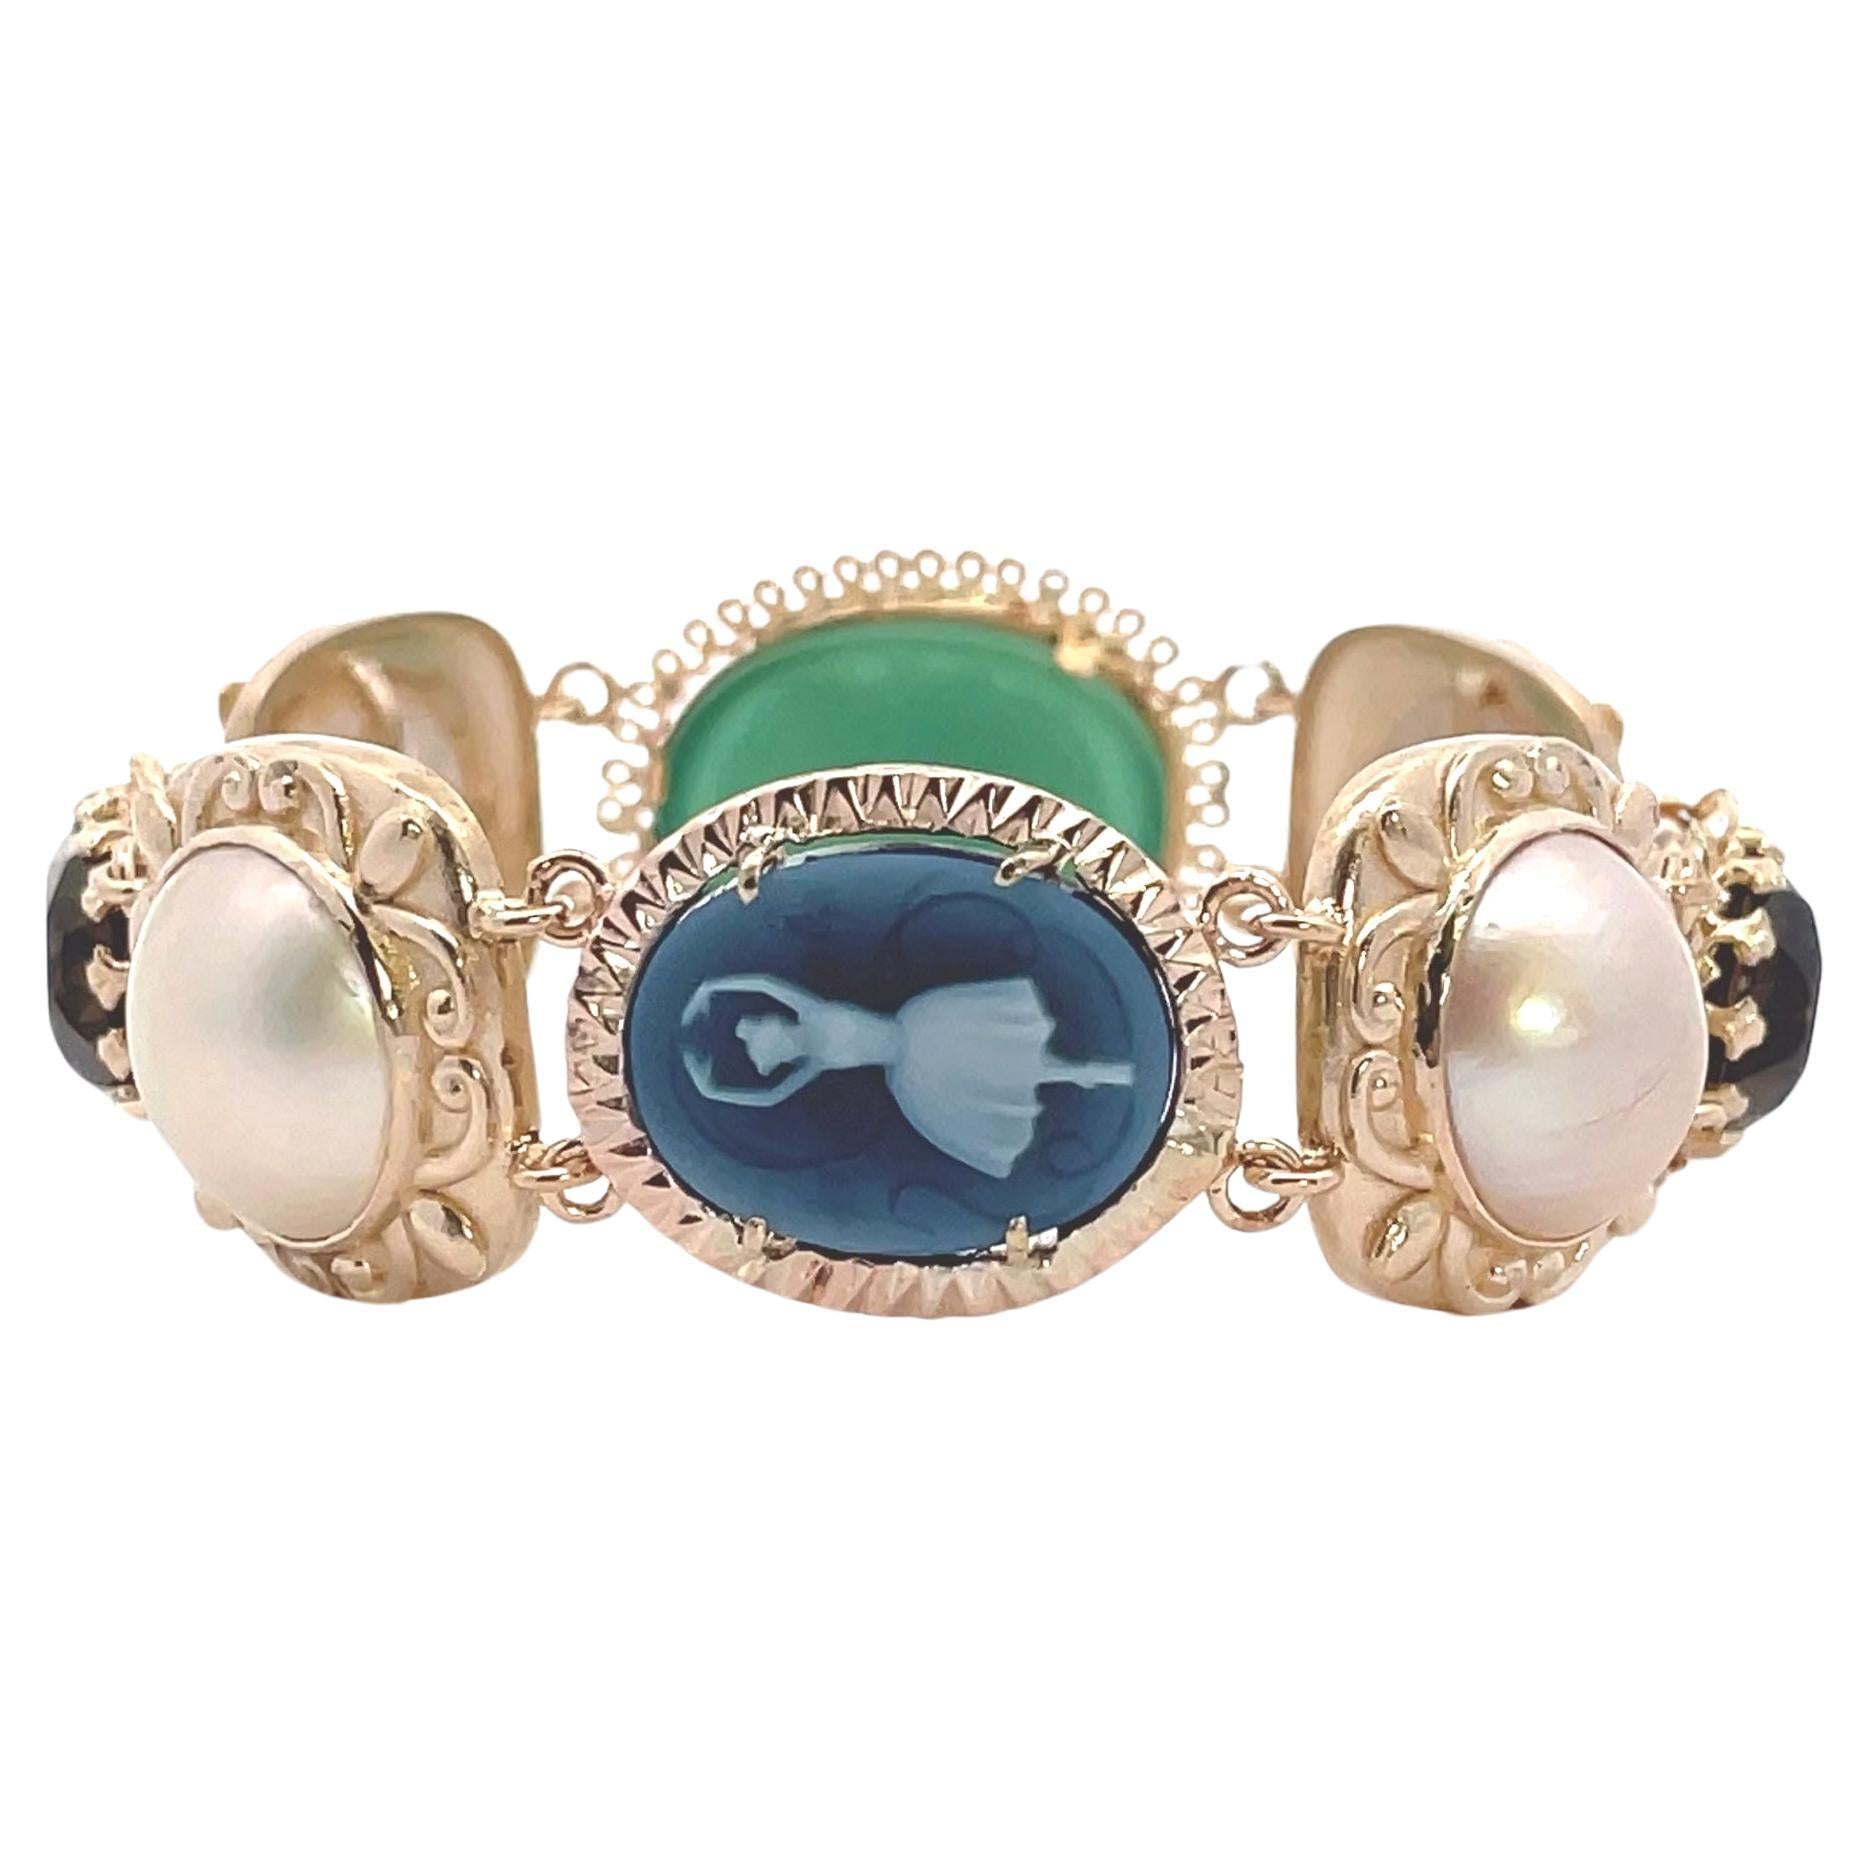 Vintage Components -14K Yellow Gold Mobe Pearl, Cameo and Smokey Topaz Bracelet